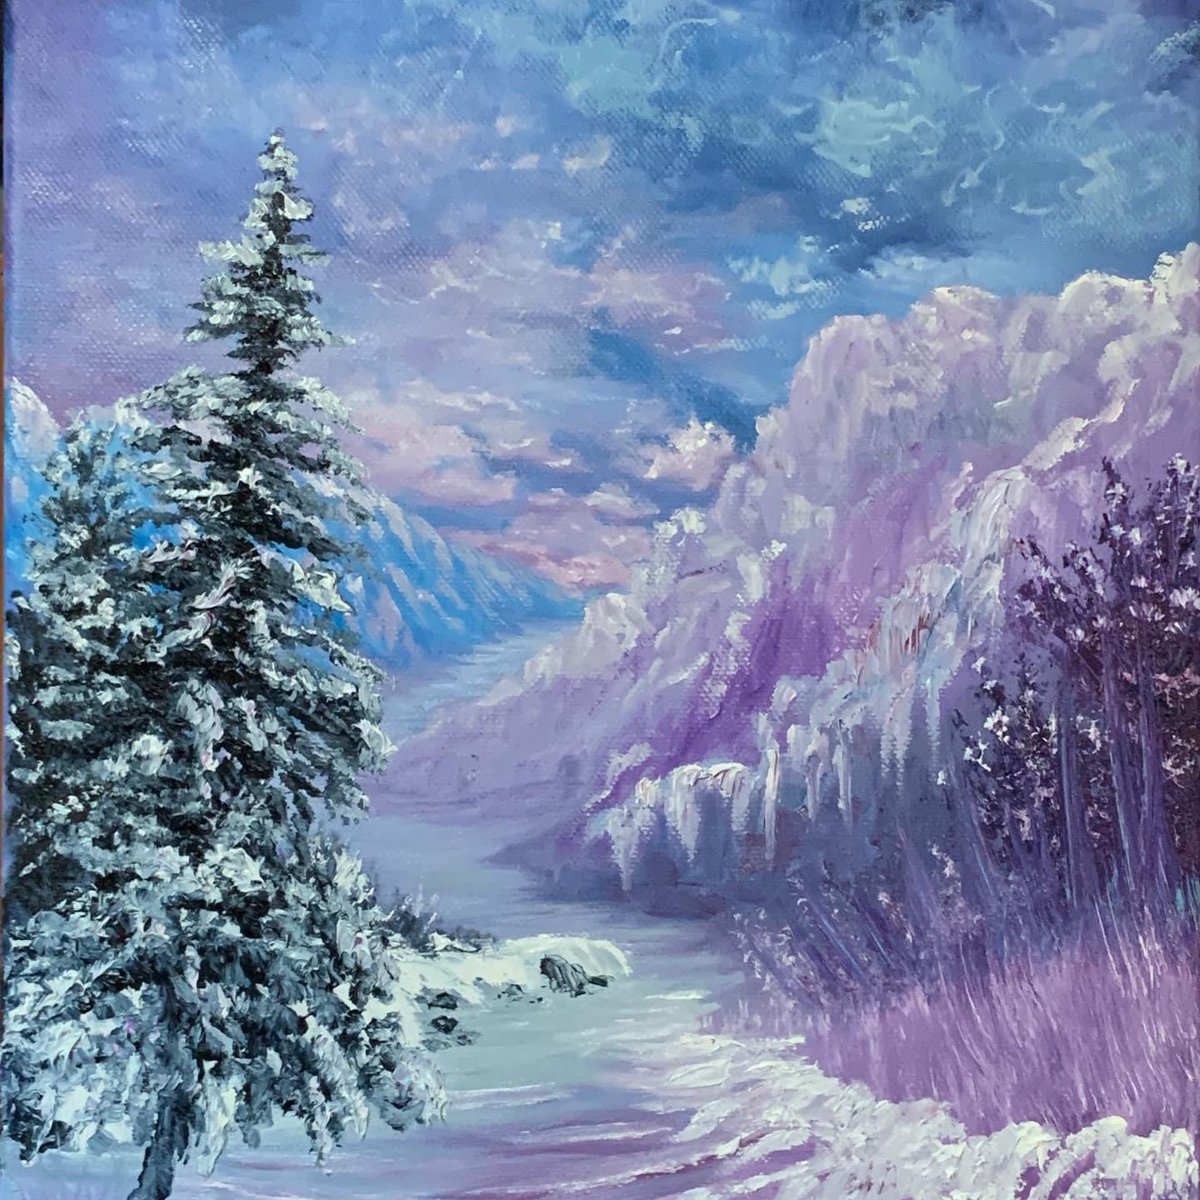 Need help naming my latest work. 11x14” oil on canvas. “Creating helps the mind escape the pain” #alispaintingcreations #rsgcommunity #fantasypainting #oilpainting #healingjourney #fightdepression #canvaspaintings #landscapepainting #interiordecorating